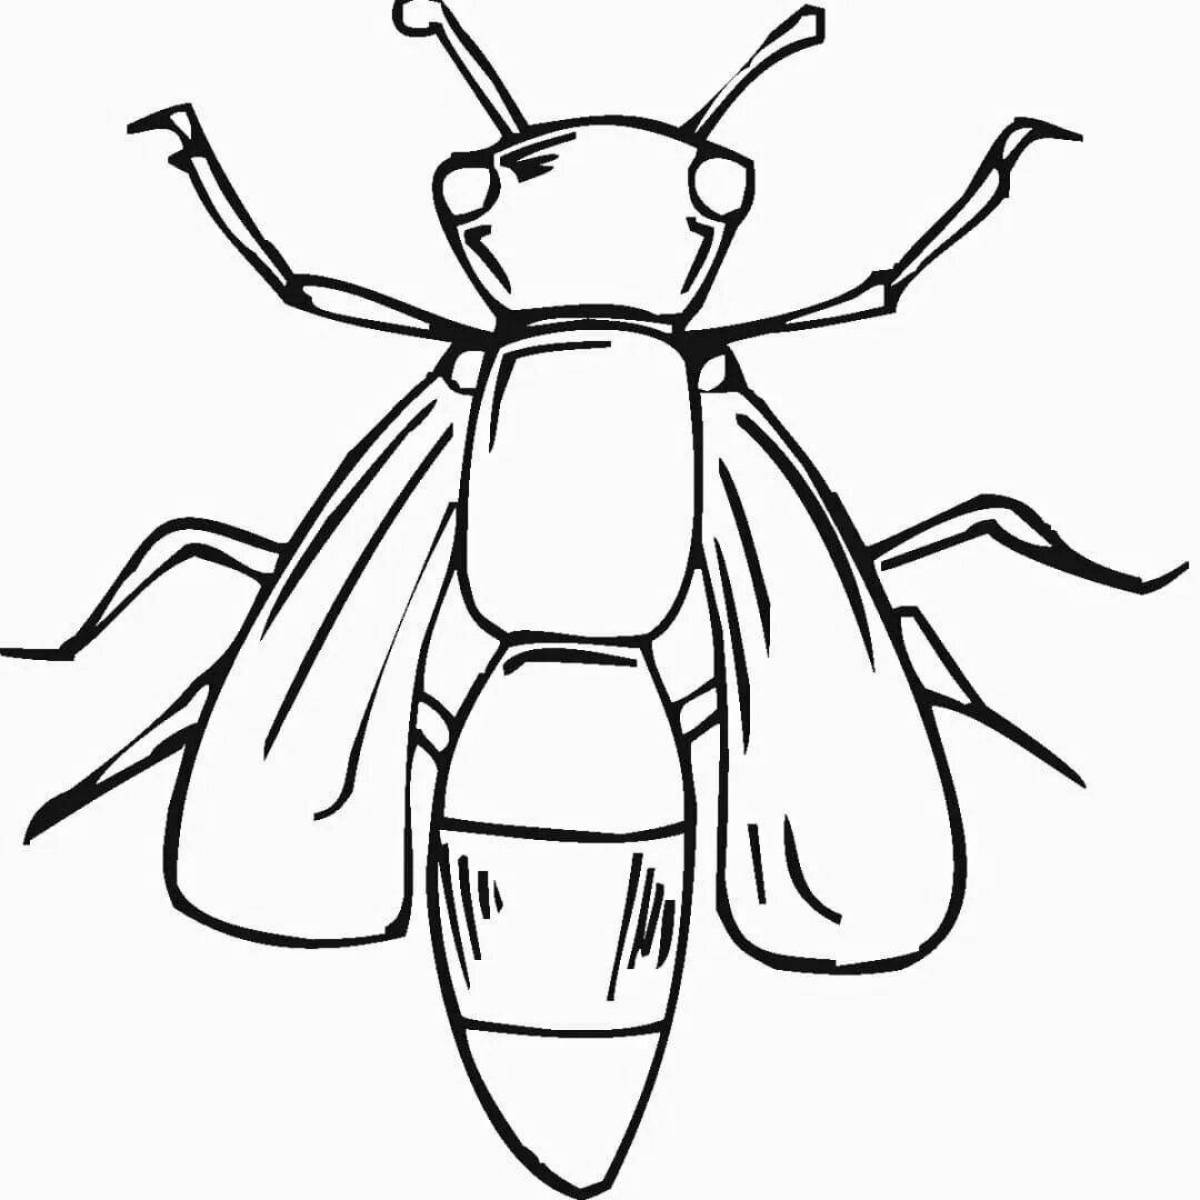 Exciting coloring page bug